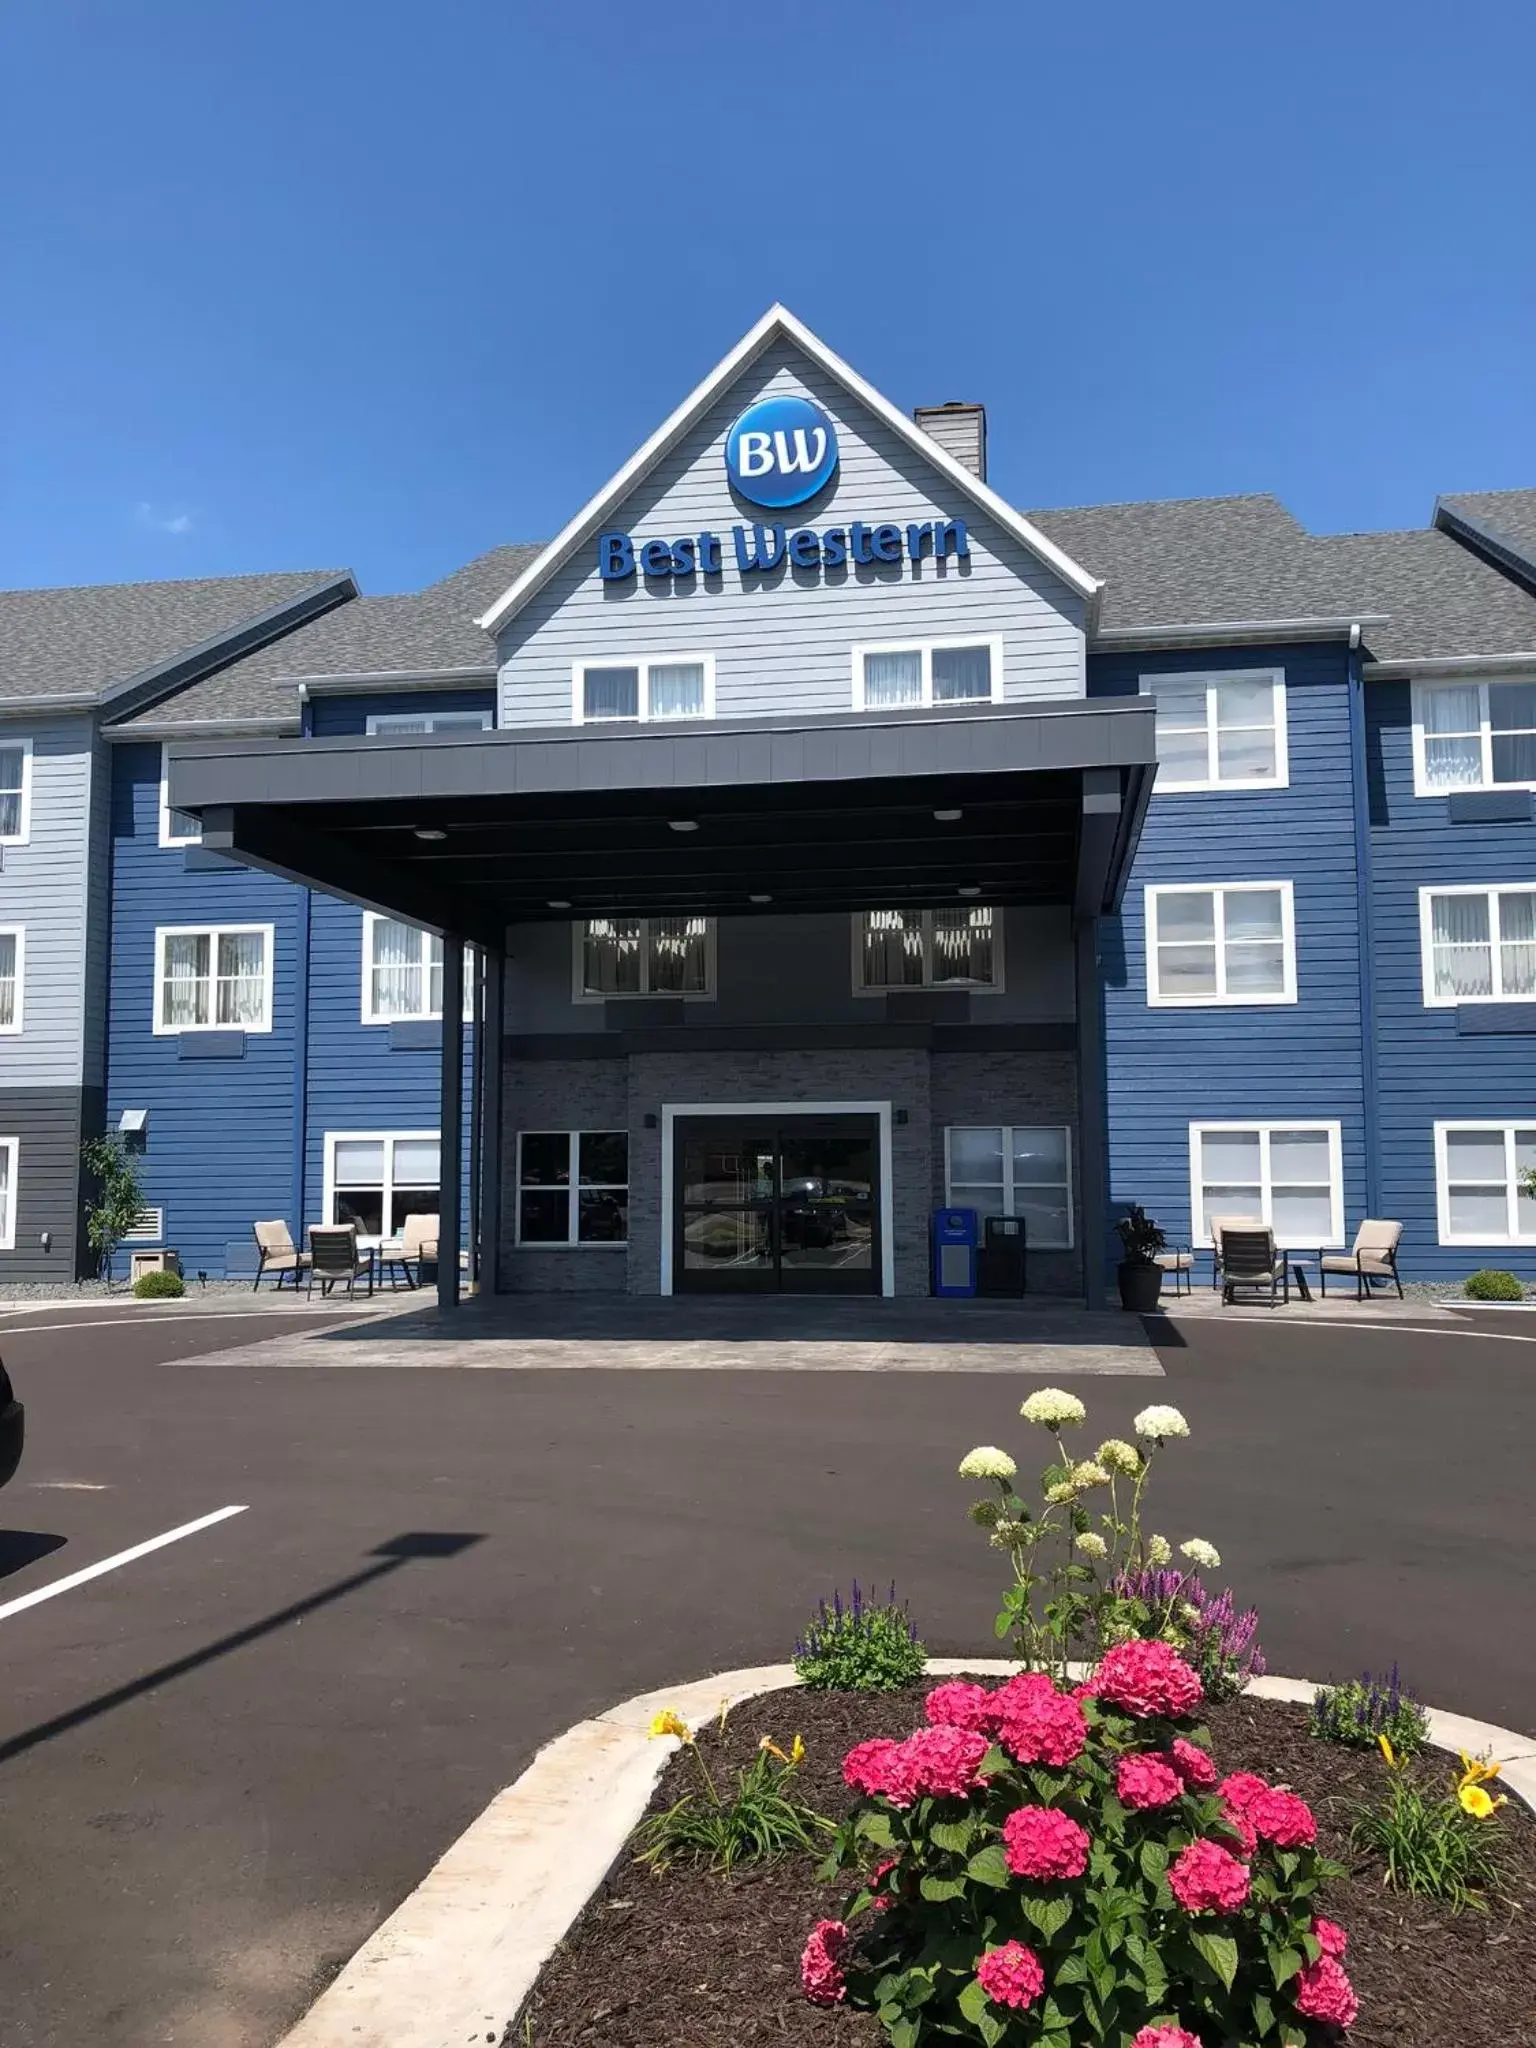 Property Building in Best Western Eau Claire South